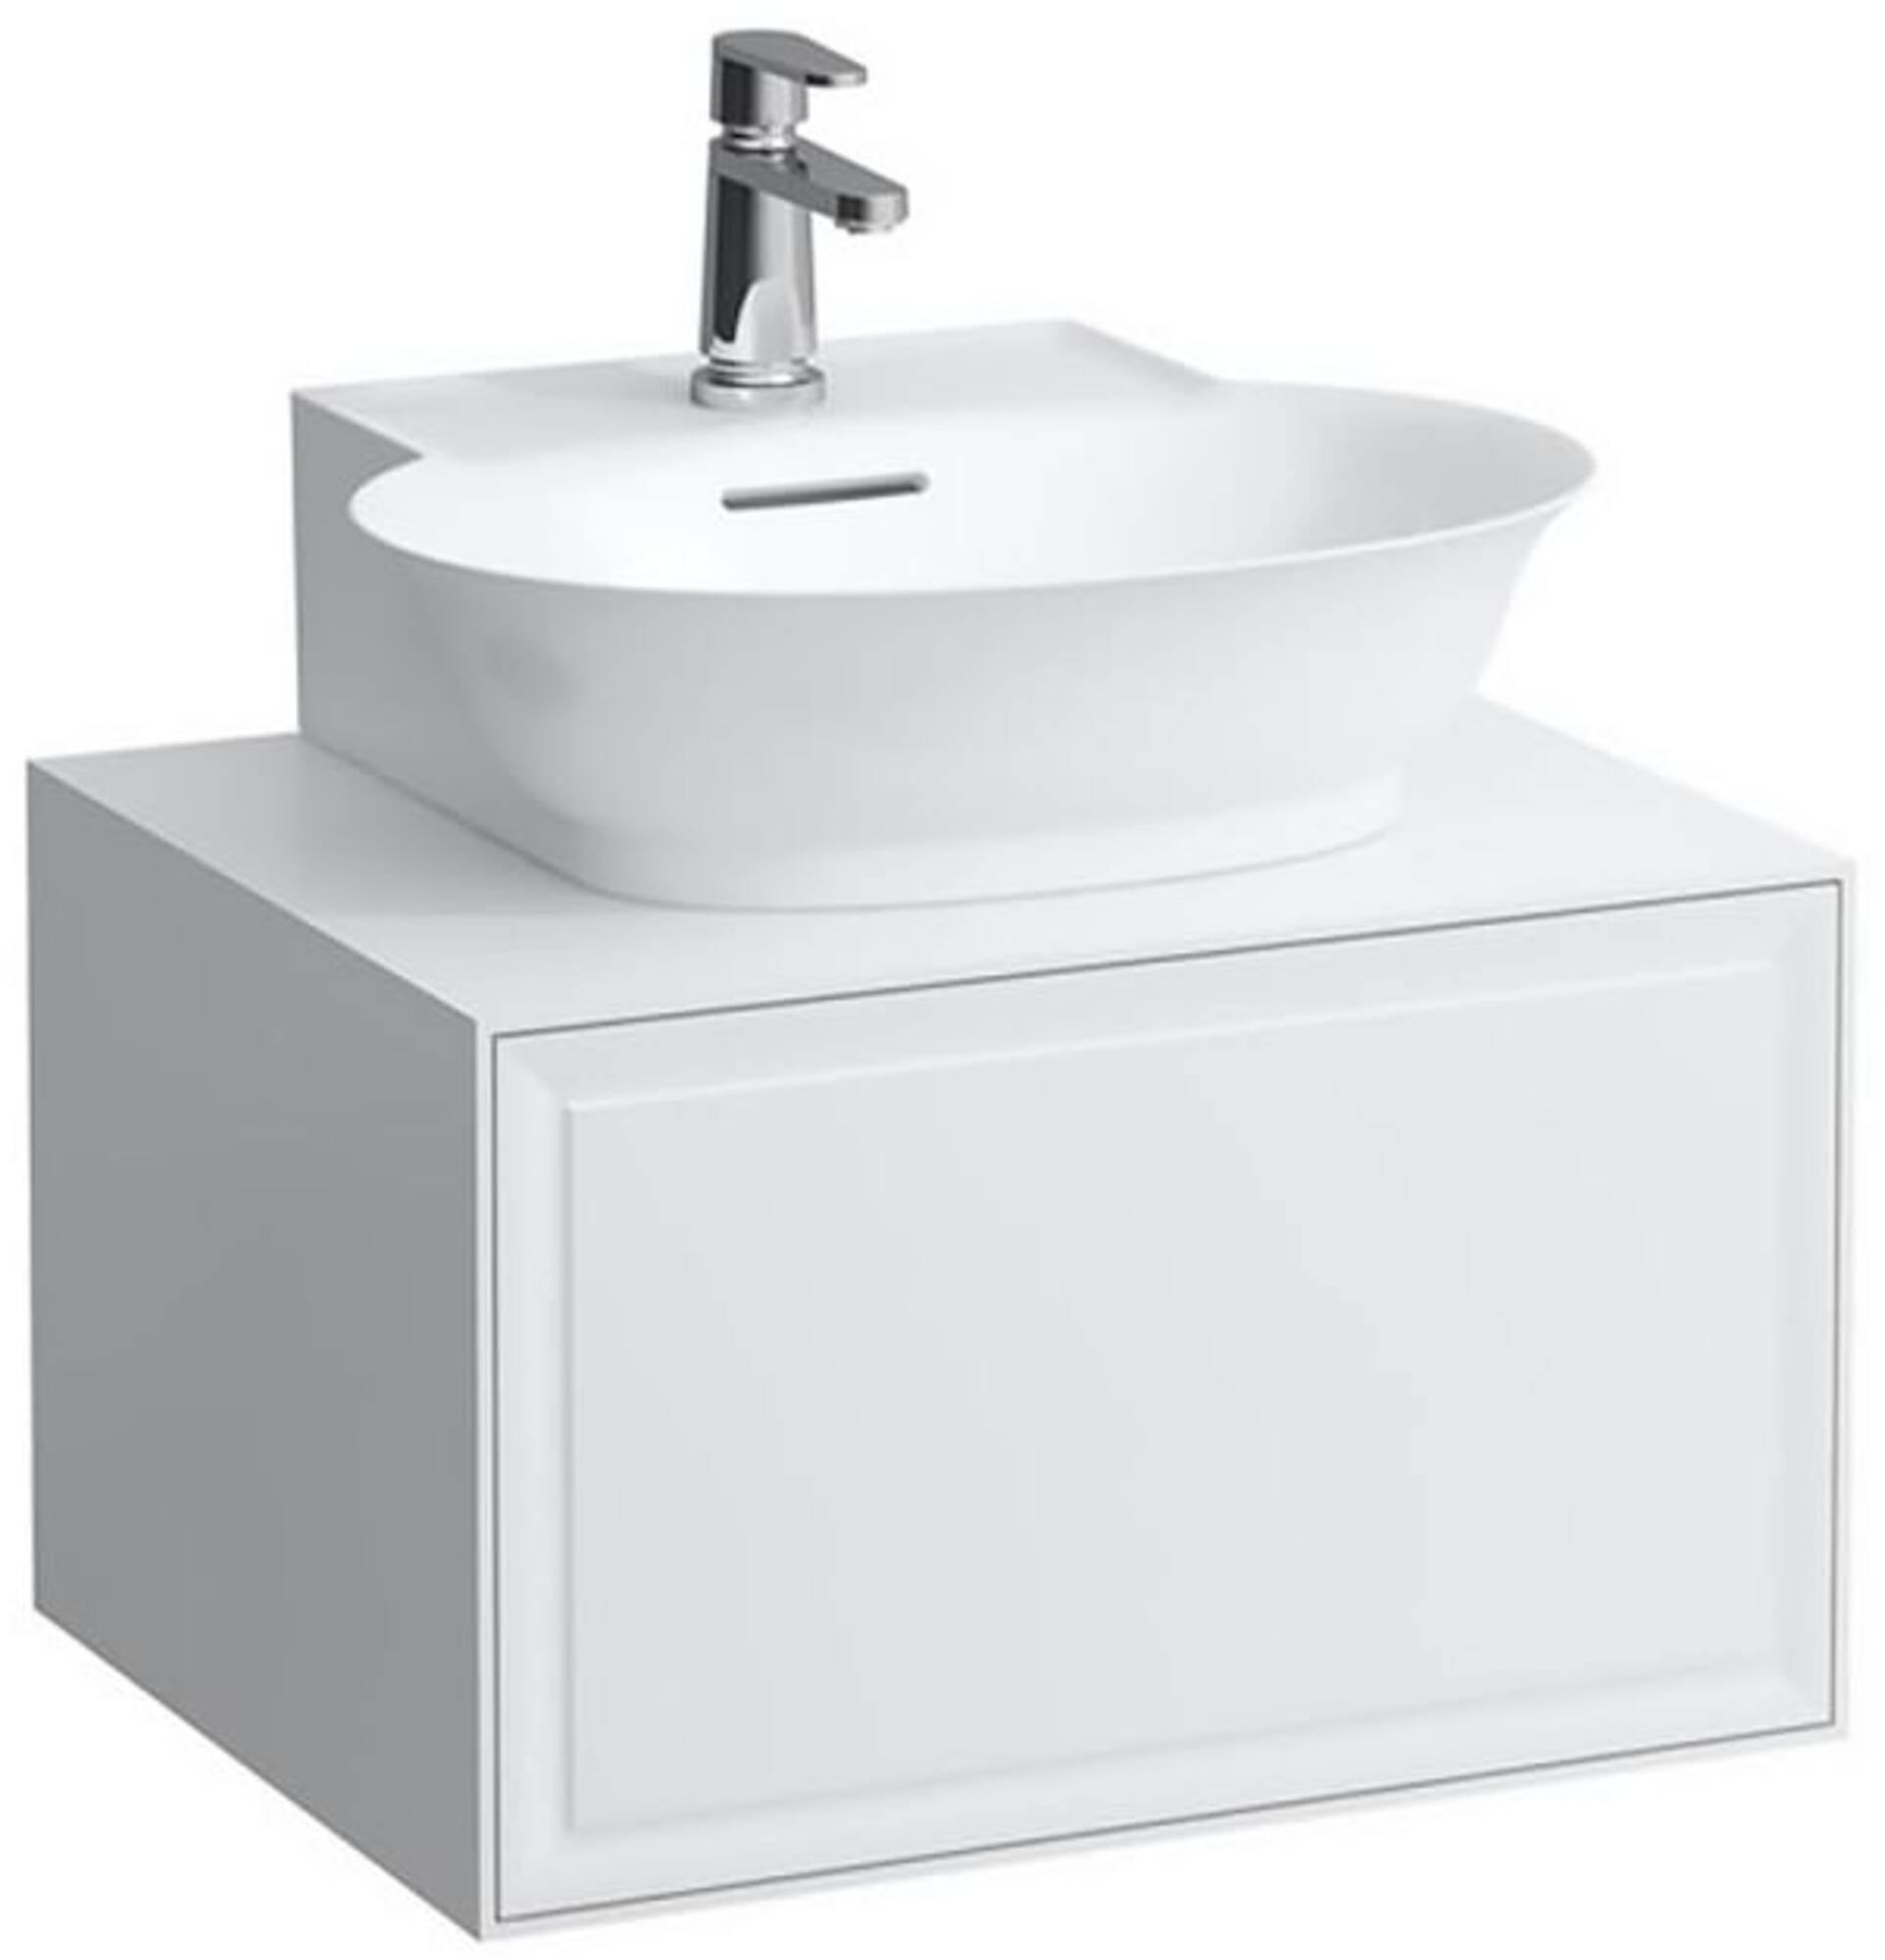 Laufen The New Classic Lade Element 1 lade 57,5x45,5 cm White Glossy